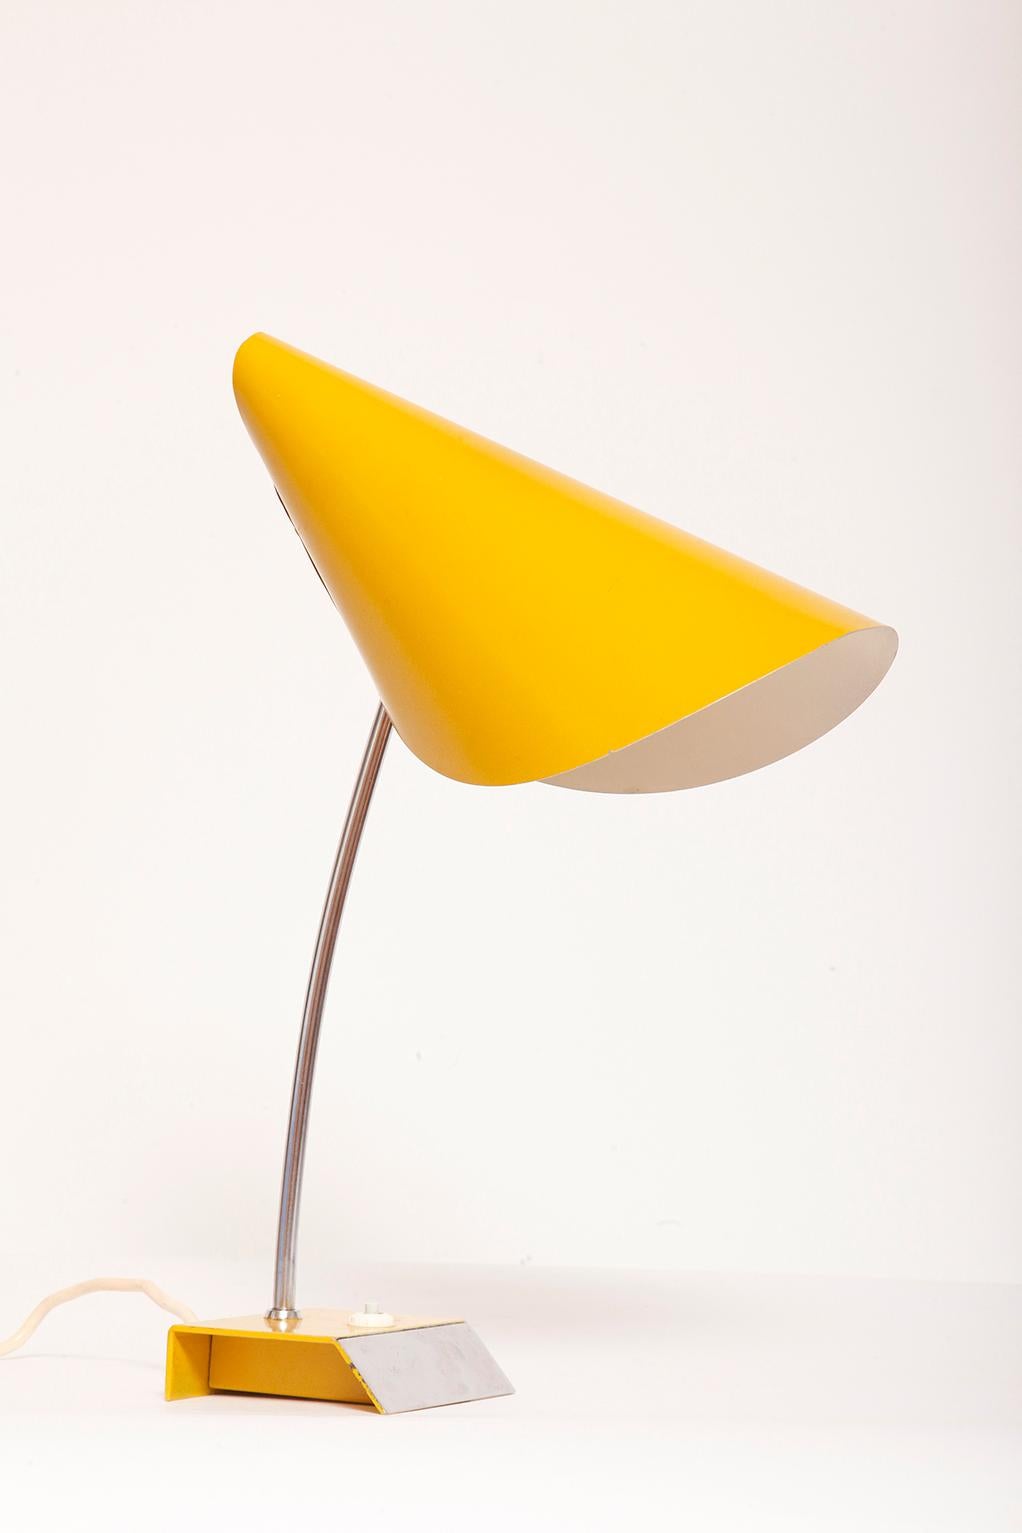 Czechoslovakian desk lamp, with a great ergonomic shape.

A lamp commonly called a nun. I've never seen anyone wearing yellow clothes, but what do I know about spiritual life in Czechoslovakia?
Well, not much, not to say nothing.

Preserved in good